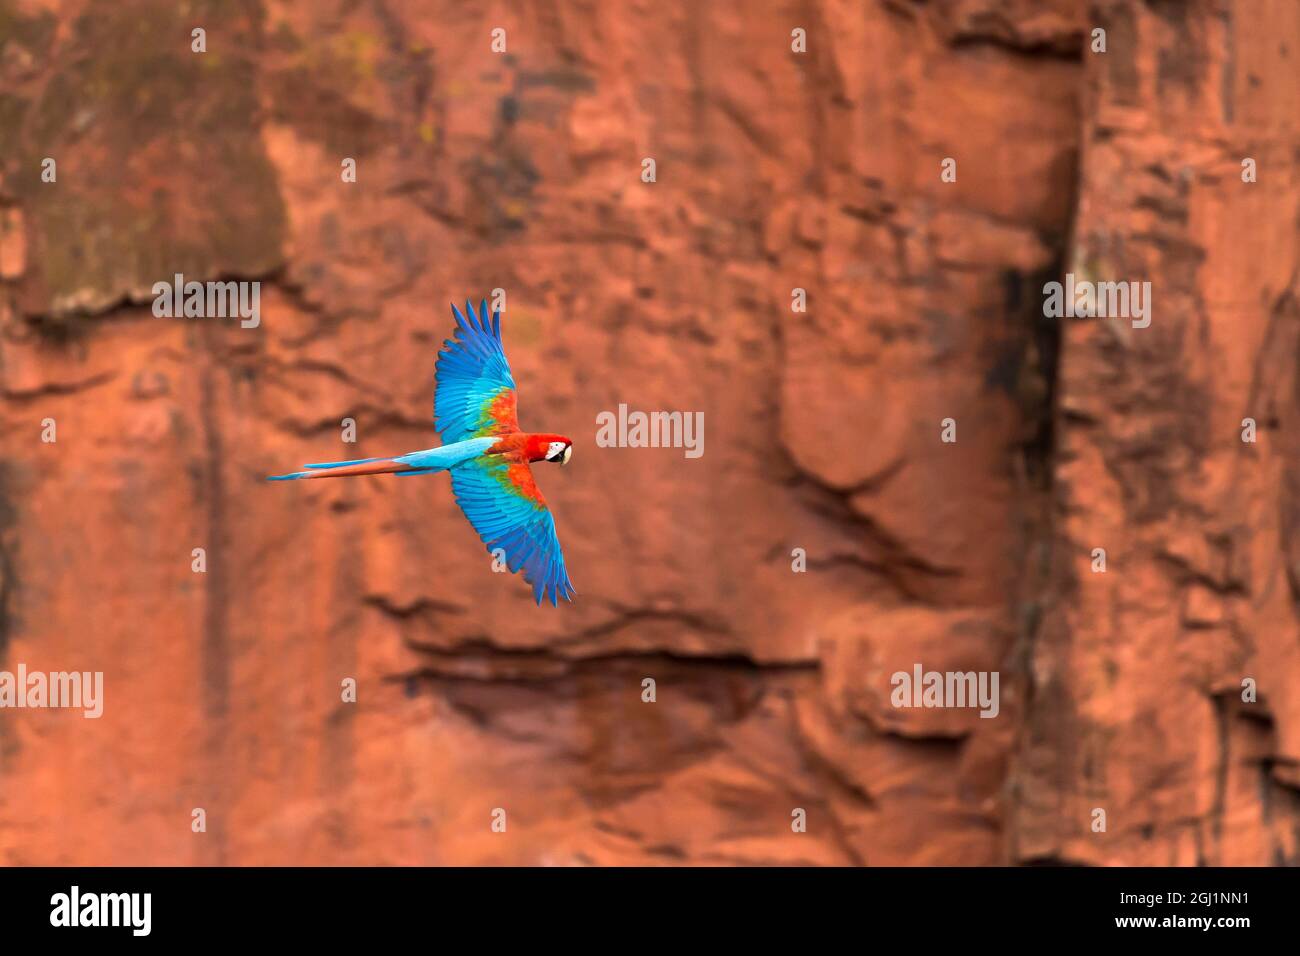 South America, Brazil, Mato Grosso do Sul, Jardim, Sinkhole of the Macaws, red-and-green macaw, Ara chloropterus.  Red-and-green macaw flying in the s Stock Photo